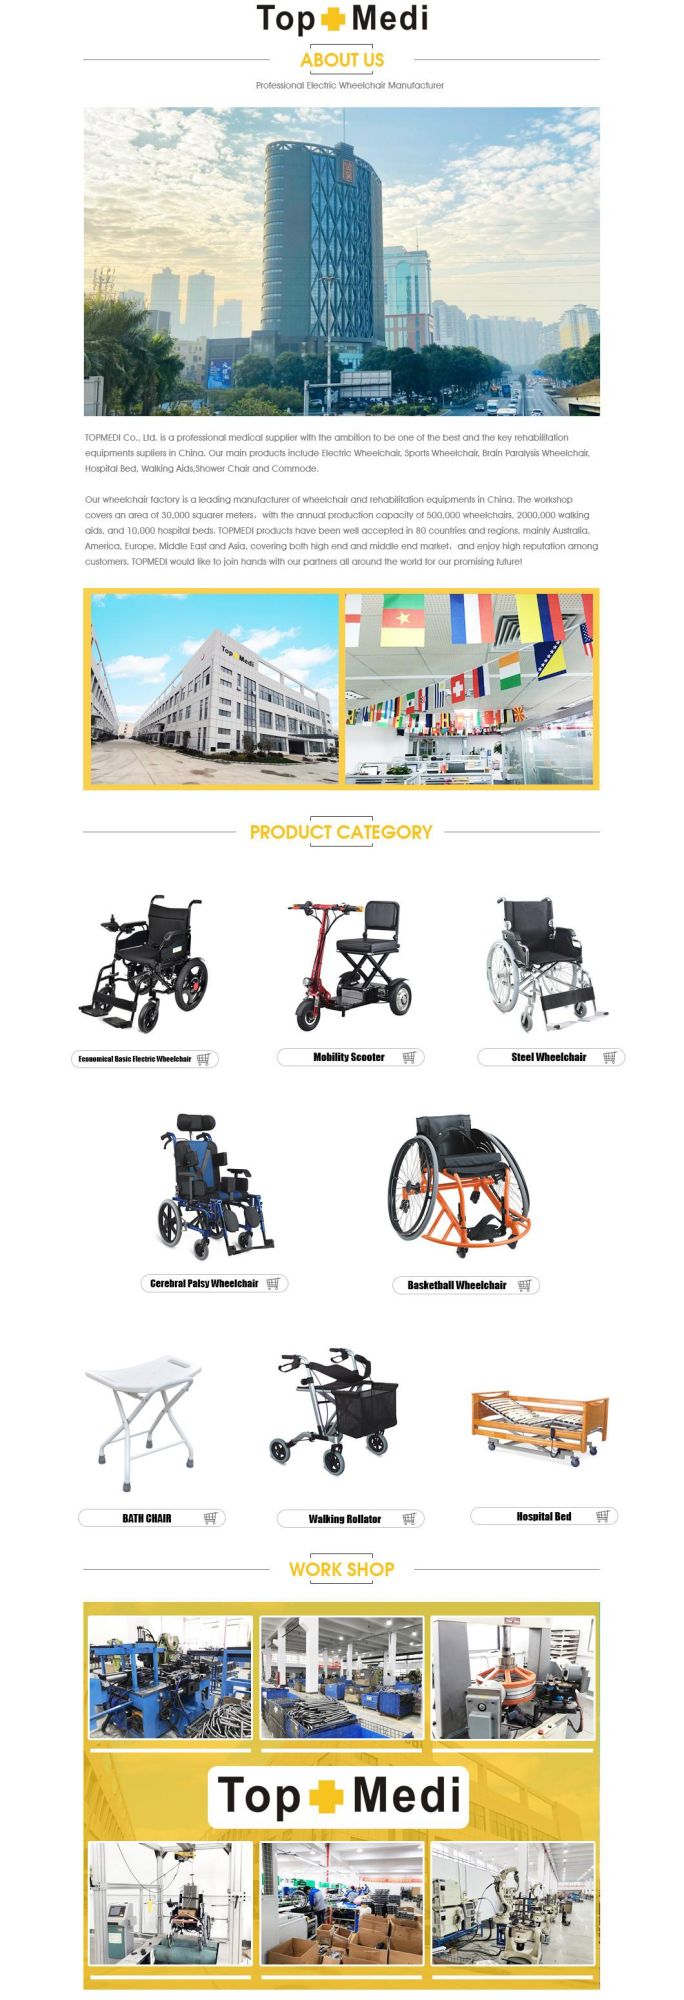 China Supplier Topmedi Manual Wheelchairs with Aluminum Frame